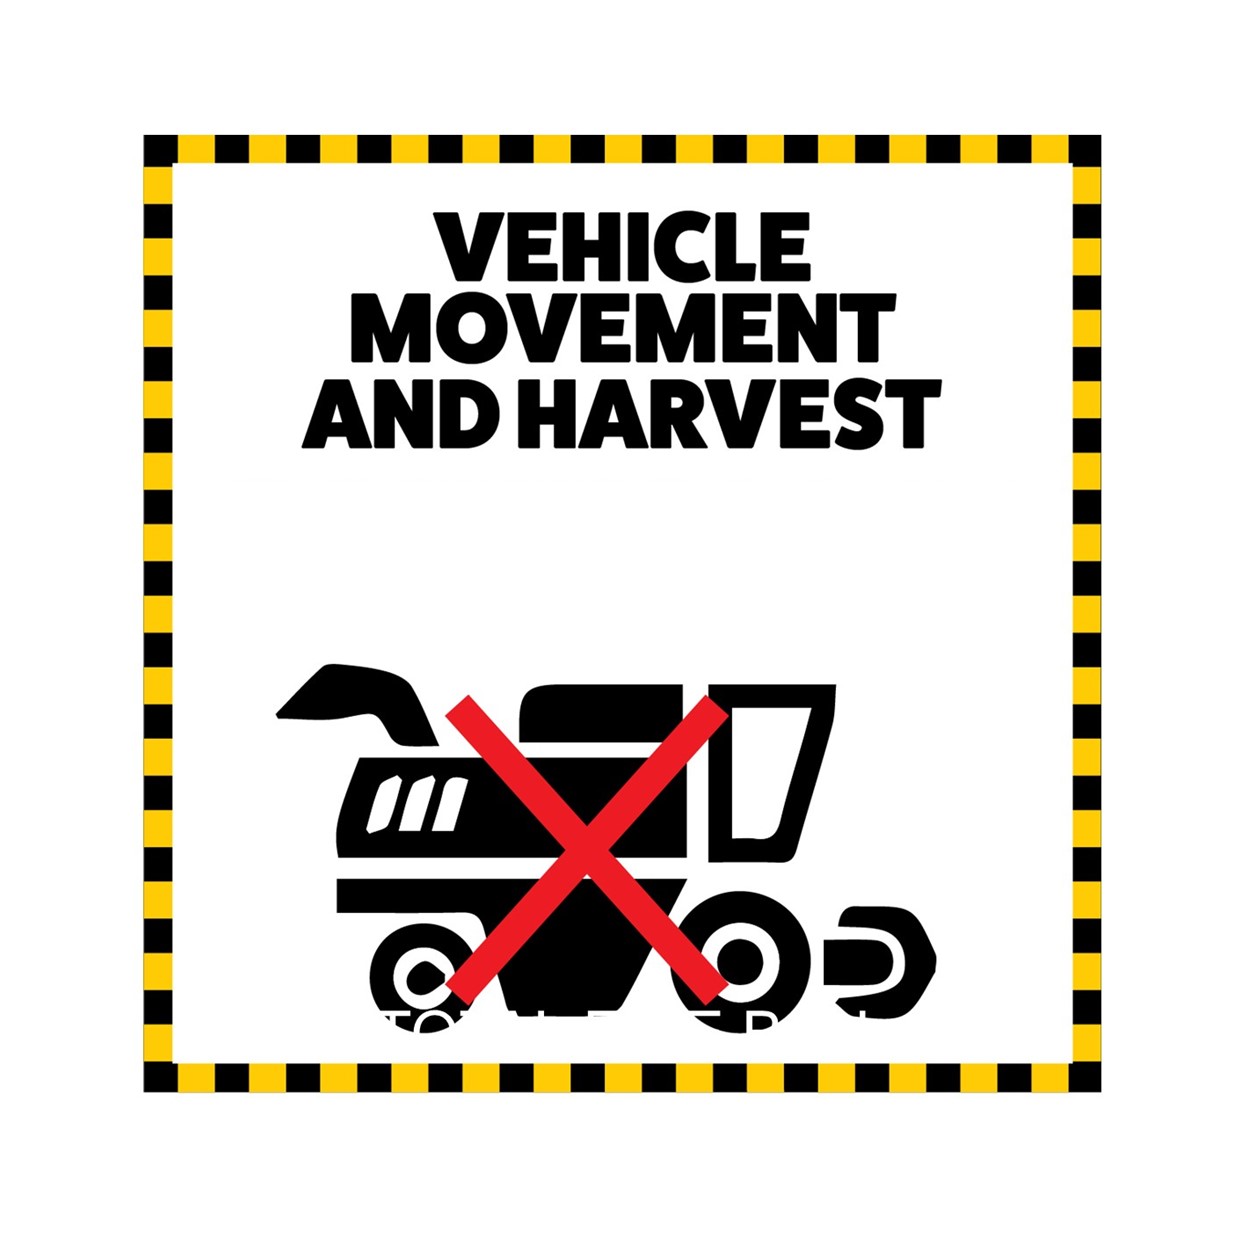 Vehicle Movement and Harvest ban information